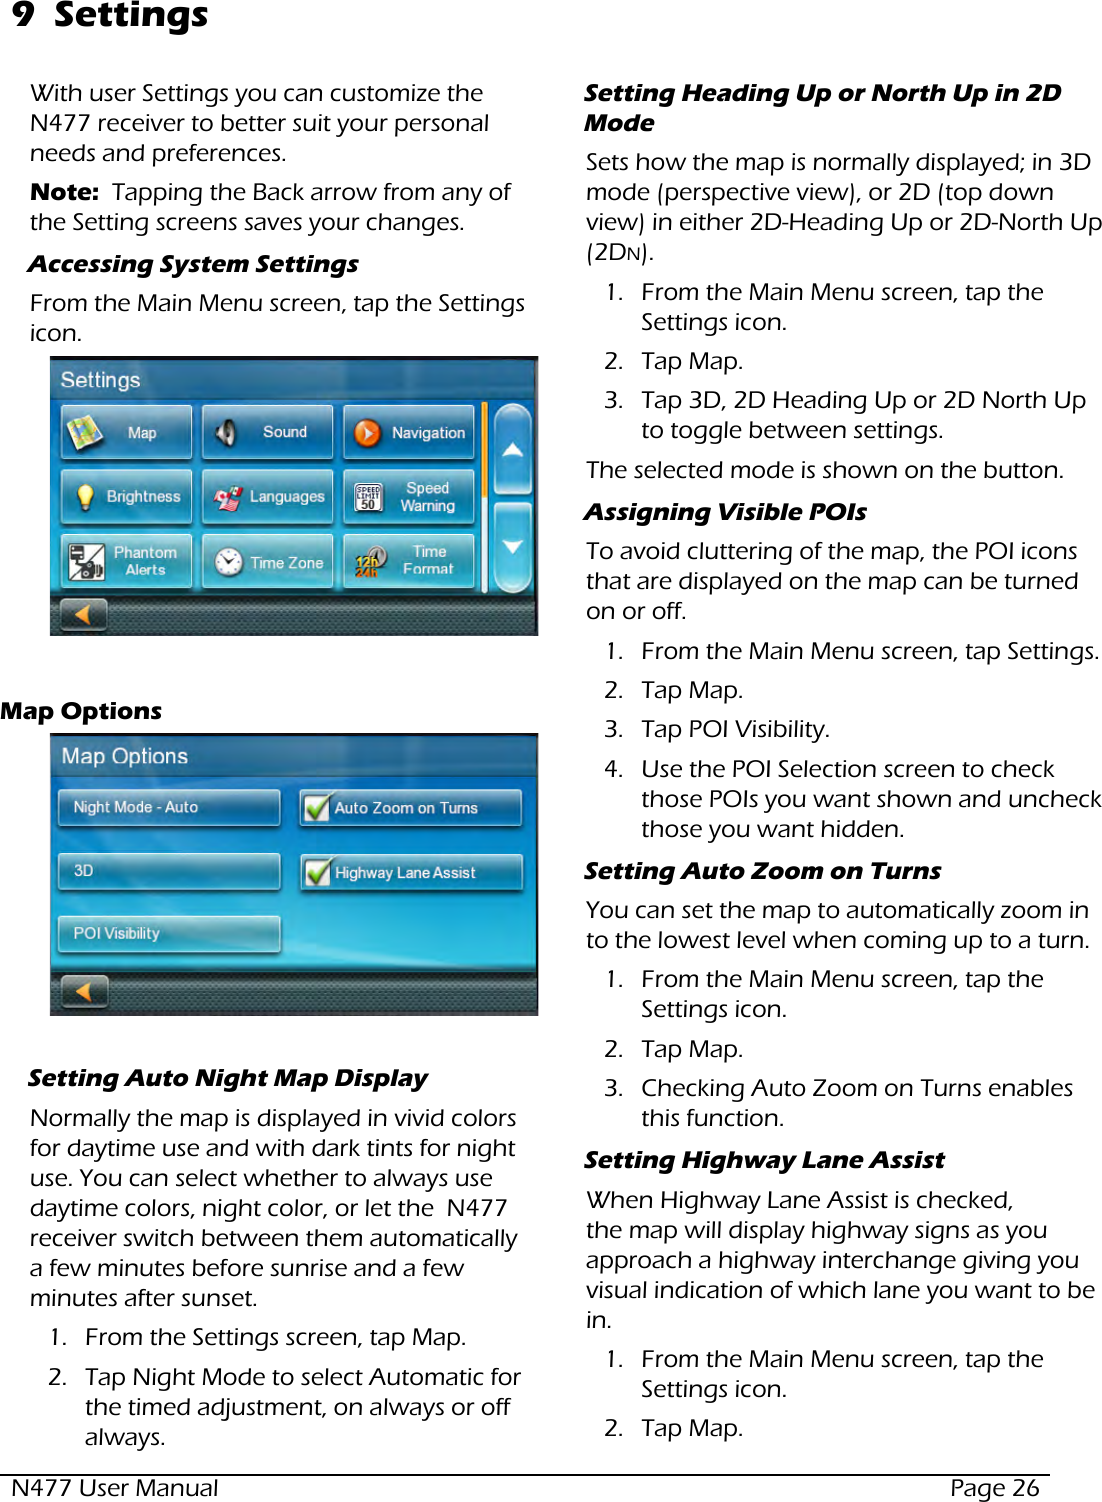 N477 User Manual  Page 269  SettingsWith user Settings you can customize the  N477 receiver to better suit your personal needs and preferences.Note:  Tapping the Back arrow from any of the Setting screens saves your changes. Accessing System SettingsFrom the Main Menu screen, tap the Settings icon.  Map OptionsSetting Auto Night Map DisplayNormally the map is displayed in vivid colors for daytime use and with dark tints for night use. You can select whether to always use daytime colors, night color, or let the  N477 receiver switch between them automatically a few minutes before sunrise and a few minutes after sunset.1.  From the Settings screen, tap Map.2.  Tap Night Mode to select Automatic for the timed adjustment, on always or off always.Setting Heading Up or North Up in 2D ModeSets how the map is normally displayed; in 3D mode (perspective view), or 2D (top down view) in either 2D-Heading Up or 2D-North Up (2DN). 1.  From the Main Menu screen, tap the Settings icon.     2.  Tap Map.3.  Tap 3D, 2D Heading Up or 2D North Up to toggle between settings.The selected mode is shown on the button.Assigning Visible POIsTo avoid cluttering of the map, the POI icons that are displayed on the map can be turned on or off.1.  From the Main Menu screen, tap Settings.    2.  Tap Map.3.  Tap POI Visibility.4.  Use the POI Selection screen to check those POIs you want shown and uncheck those you want hidden.Setting Auto Zoom on TurnsYou can set the map to automatically zoom in to the lowest level when coming up to a turn.1.  From the Main Menu screen, tap the Settings icon.     2.  Tap Map.3.  Checking Auto Zoom on Turns enables this function.Setting Highway Lane AssistWhen Highway Lane Assist is checked, the map will display highway signs as you approach a highway interchange giving you visual indication of which lane you want to be in.1.  From the Main Menu screen, tap the Settings icon.     2.  Tap Map.